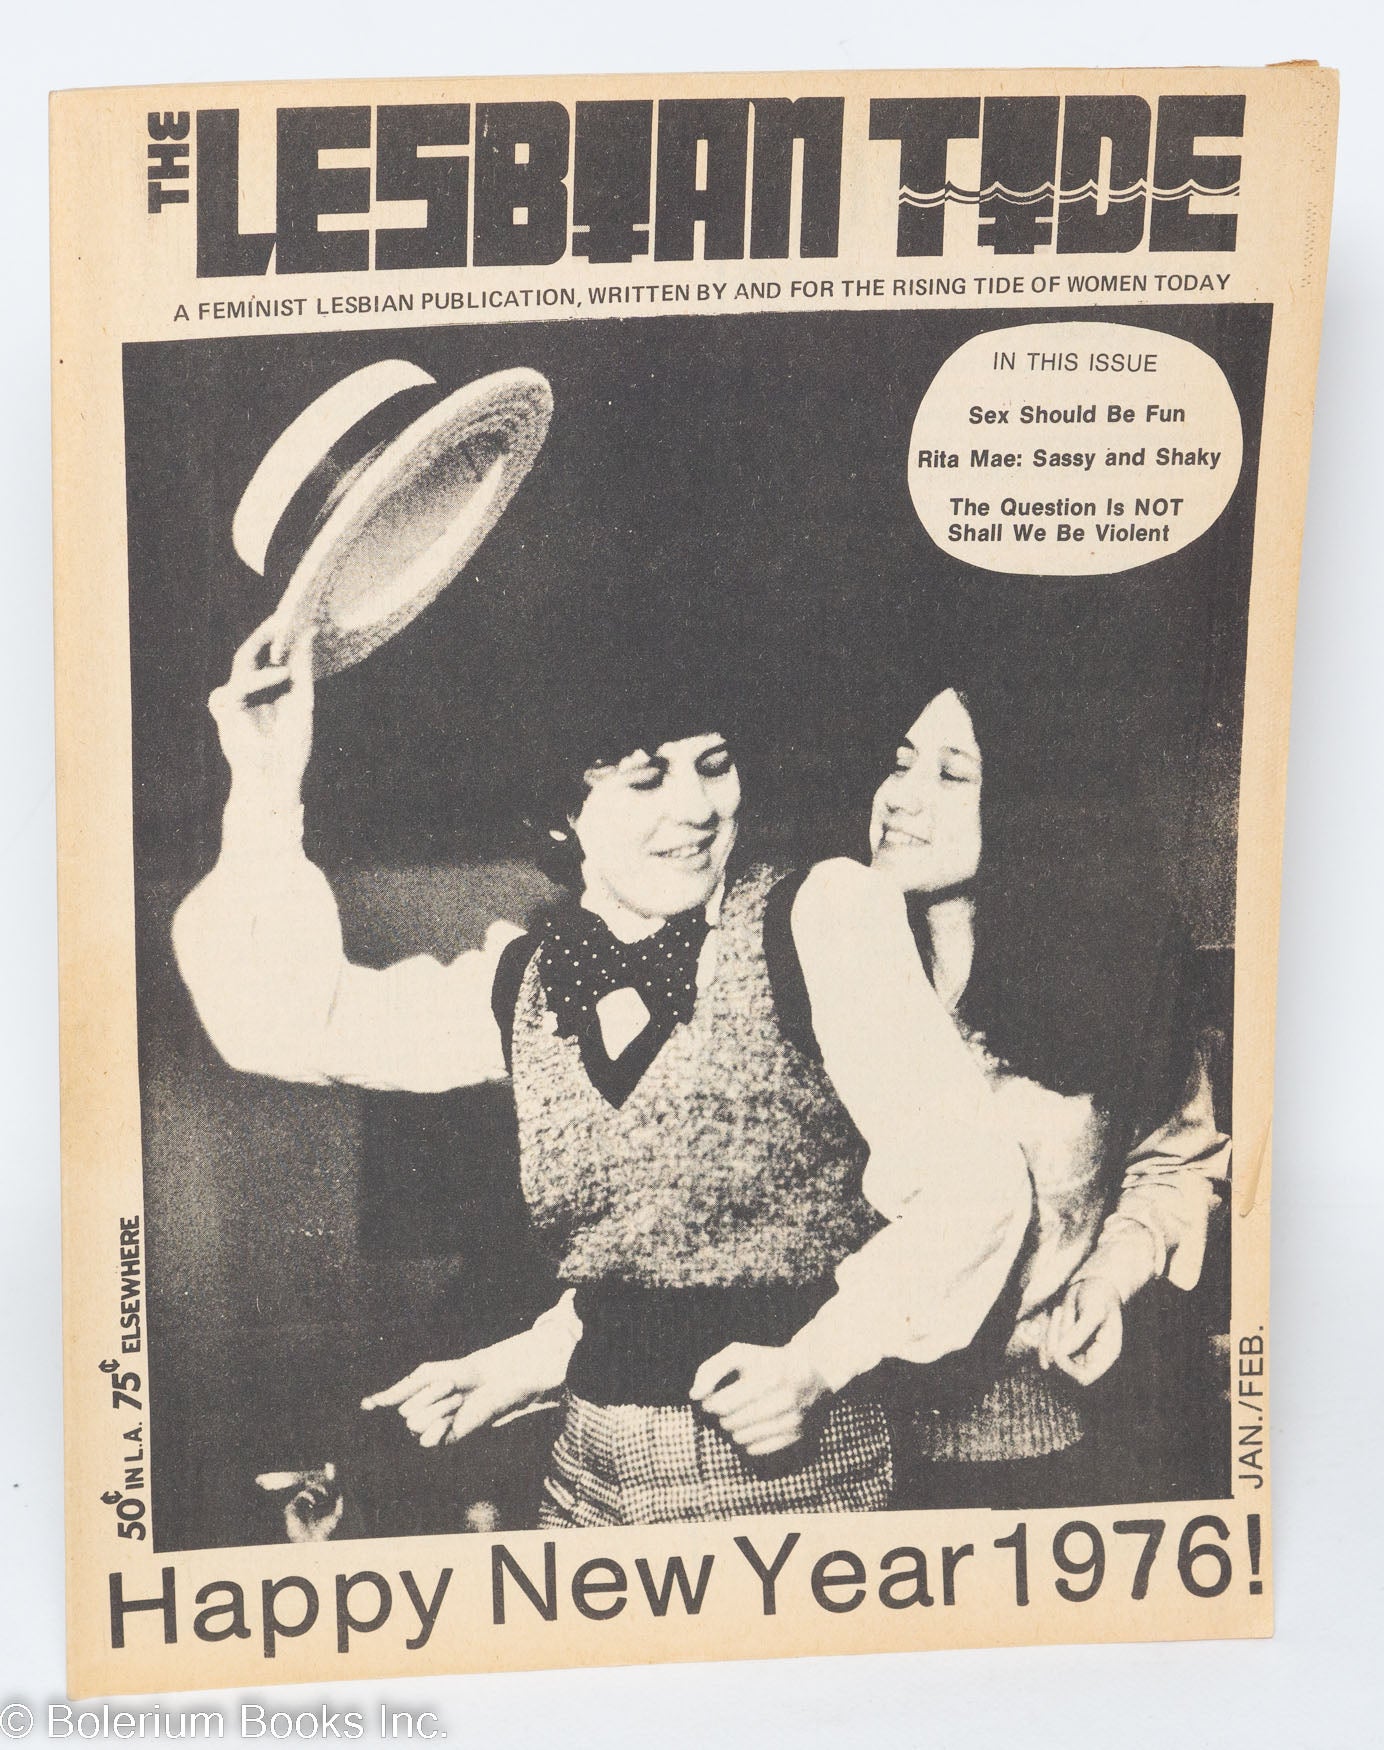 The Lesbian Tide a feminist publication, written by and for the rising tide of women today;